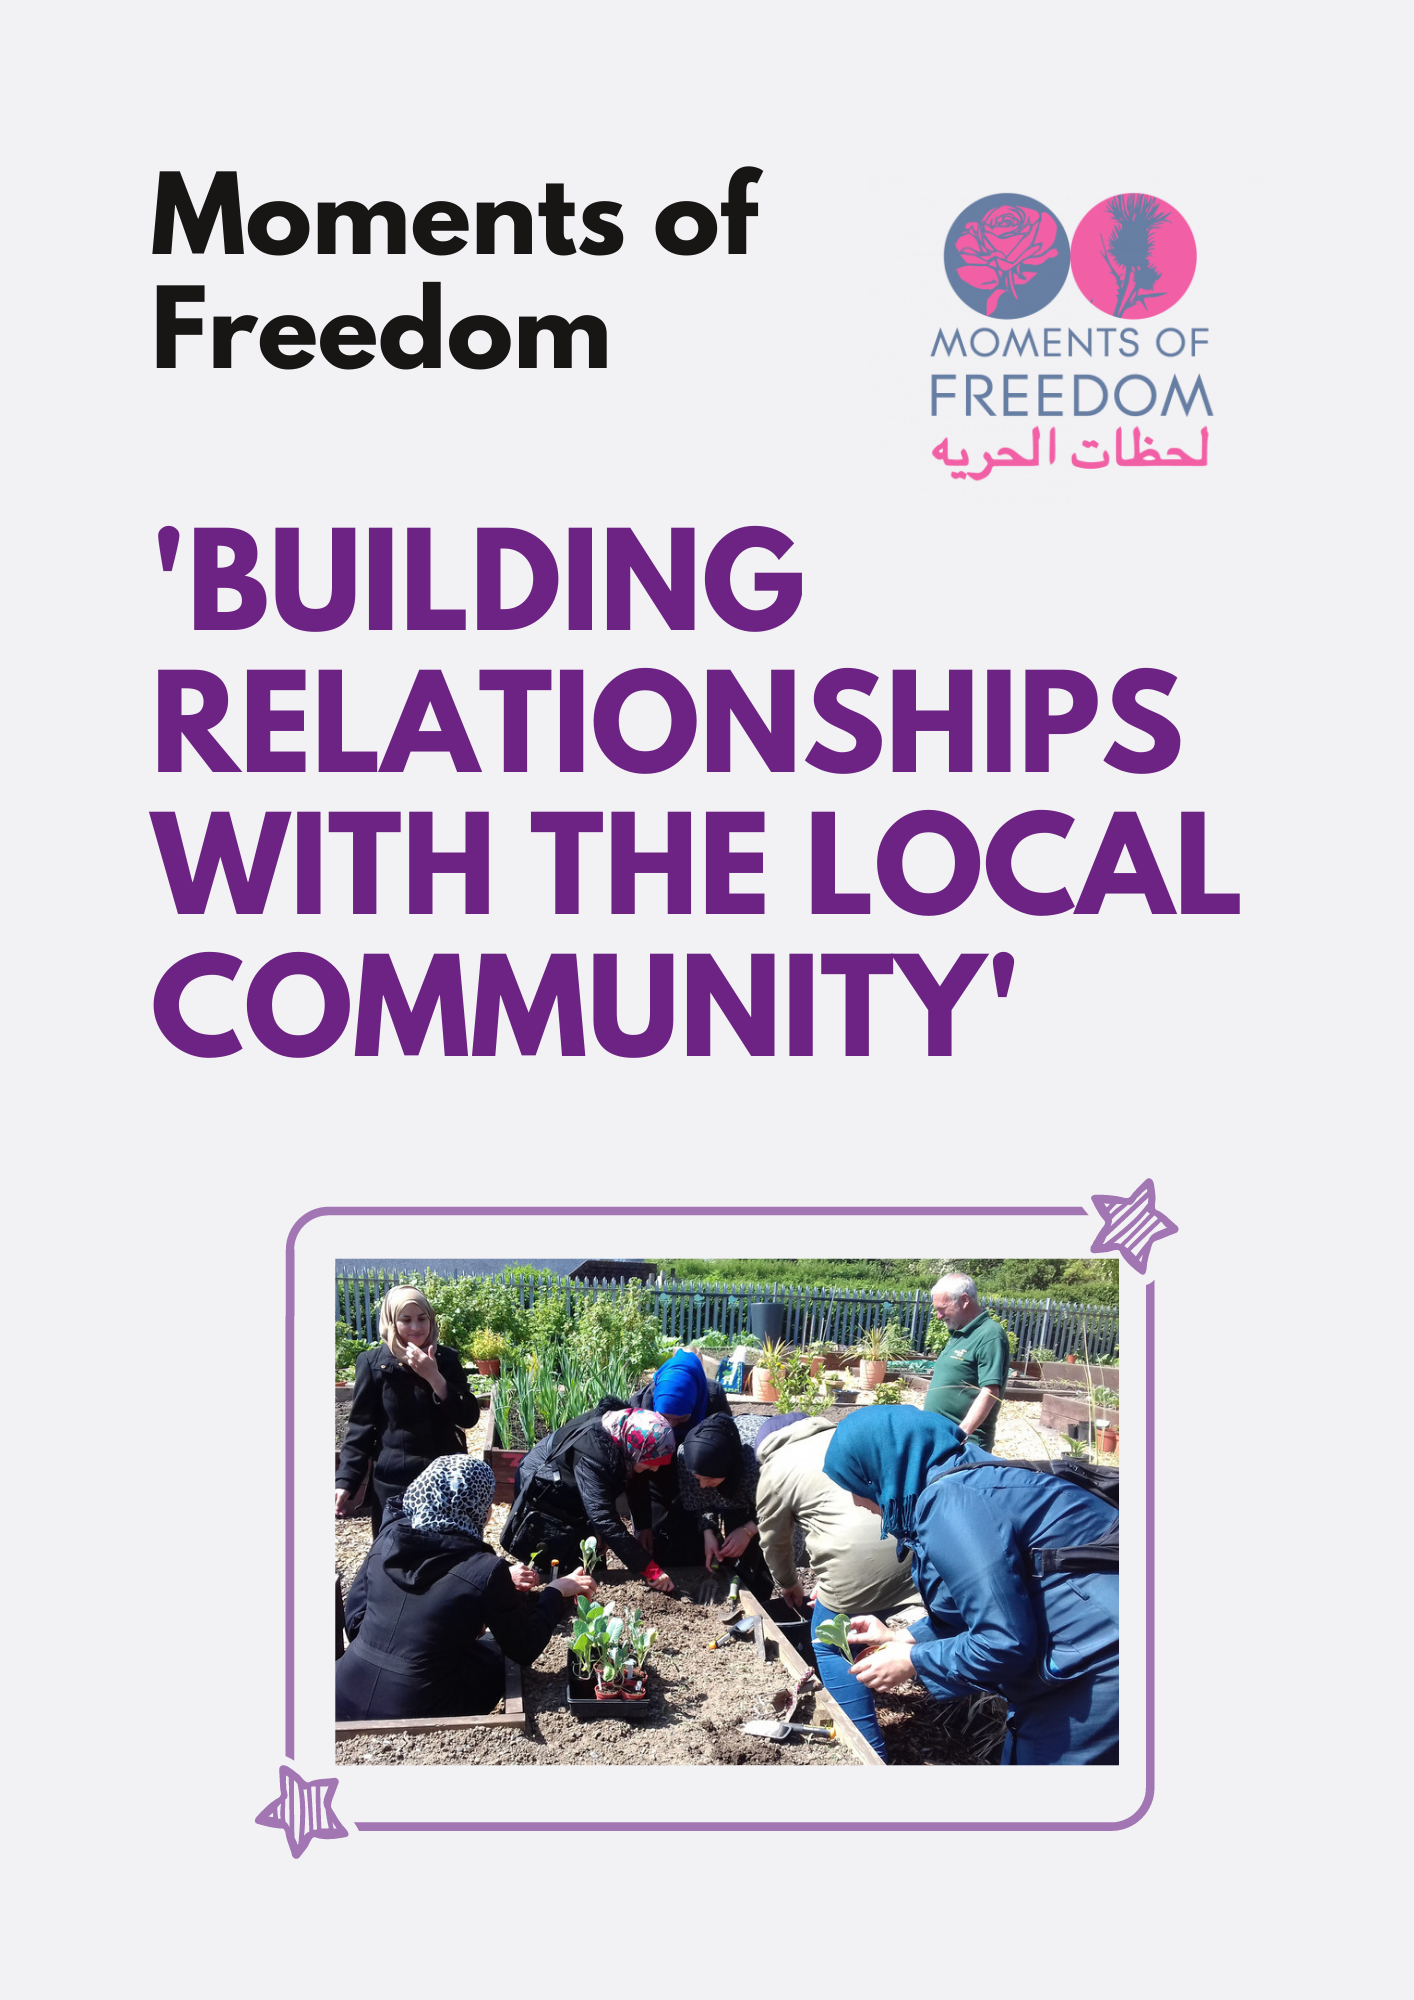 Moments of Freedom - building relationships with the local community